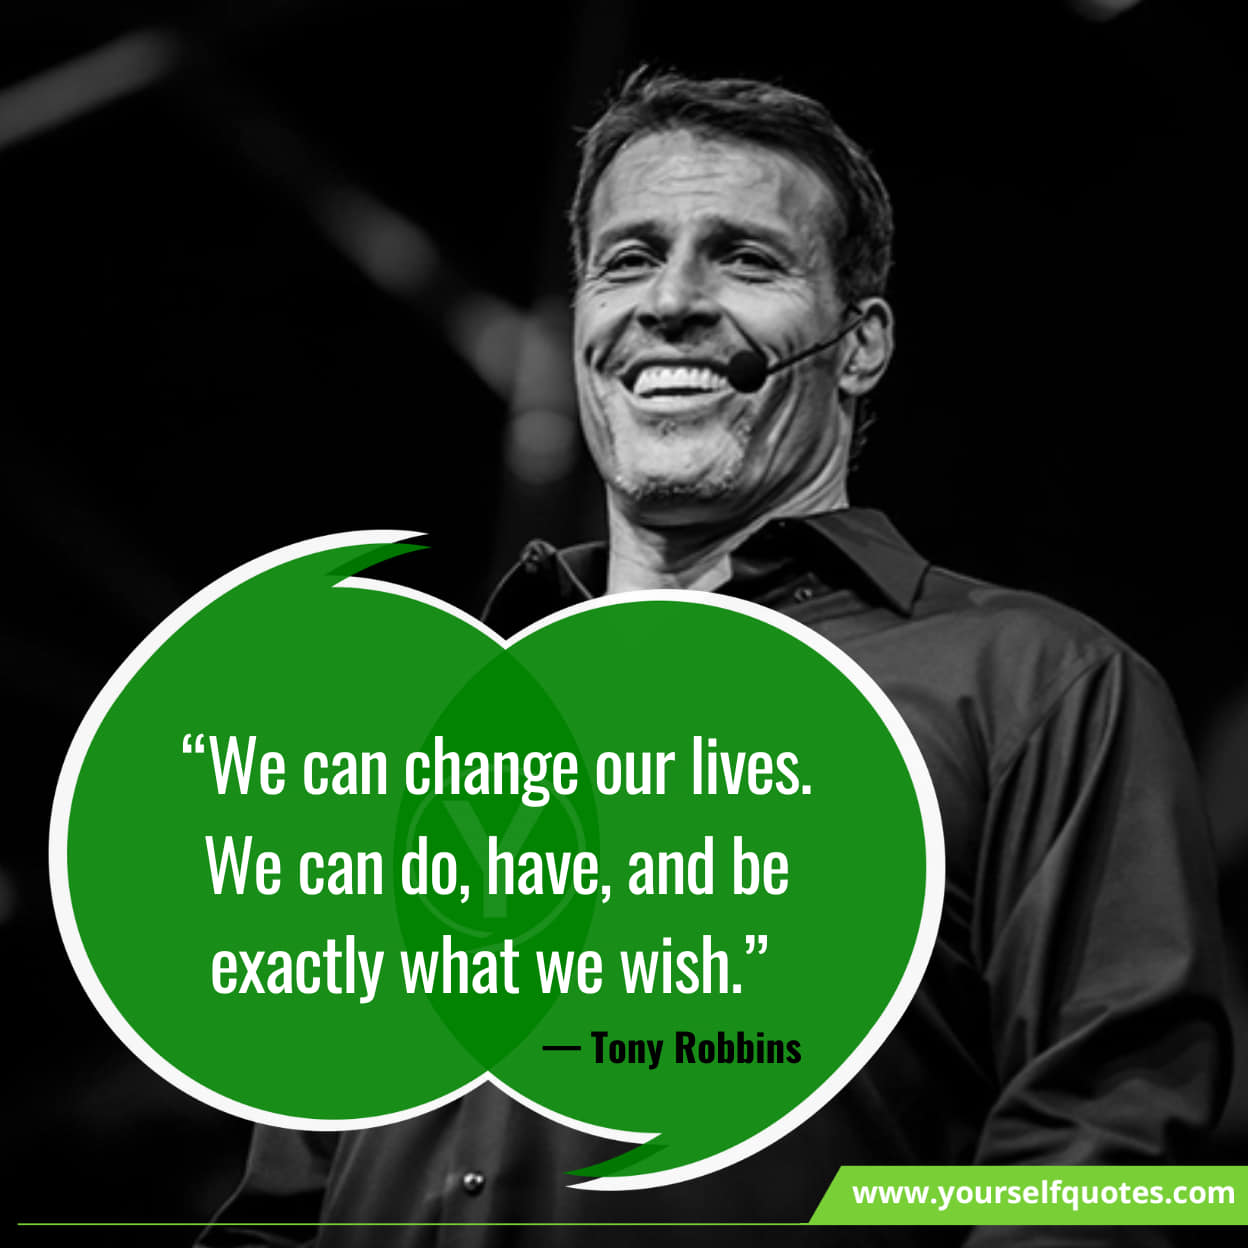 Tony Robbins Quotes For Success